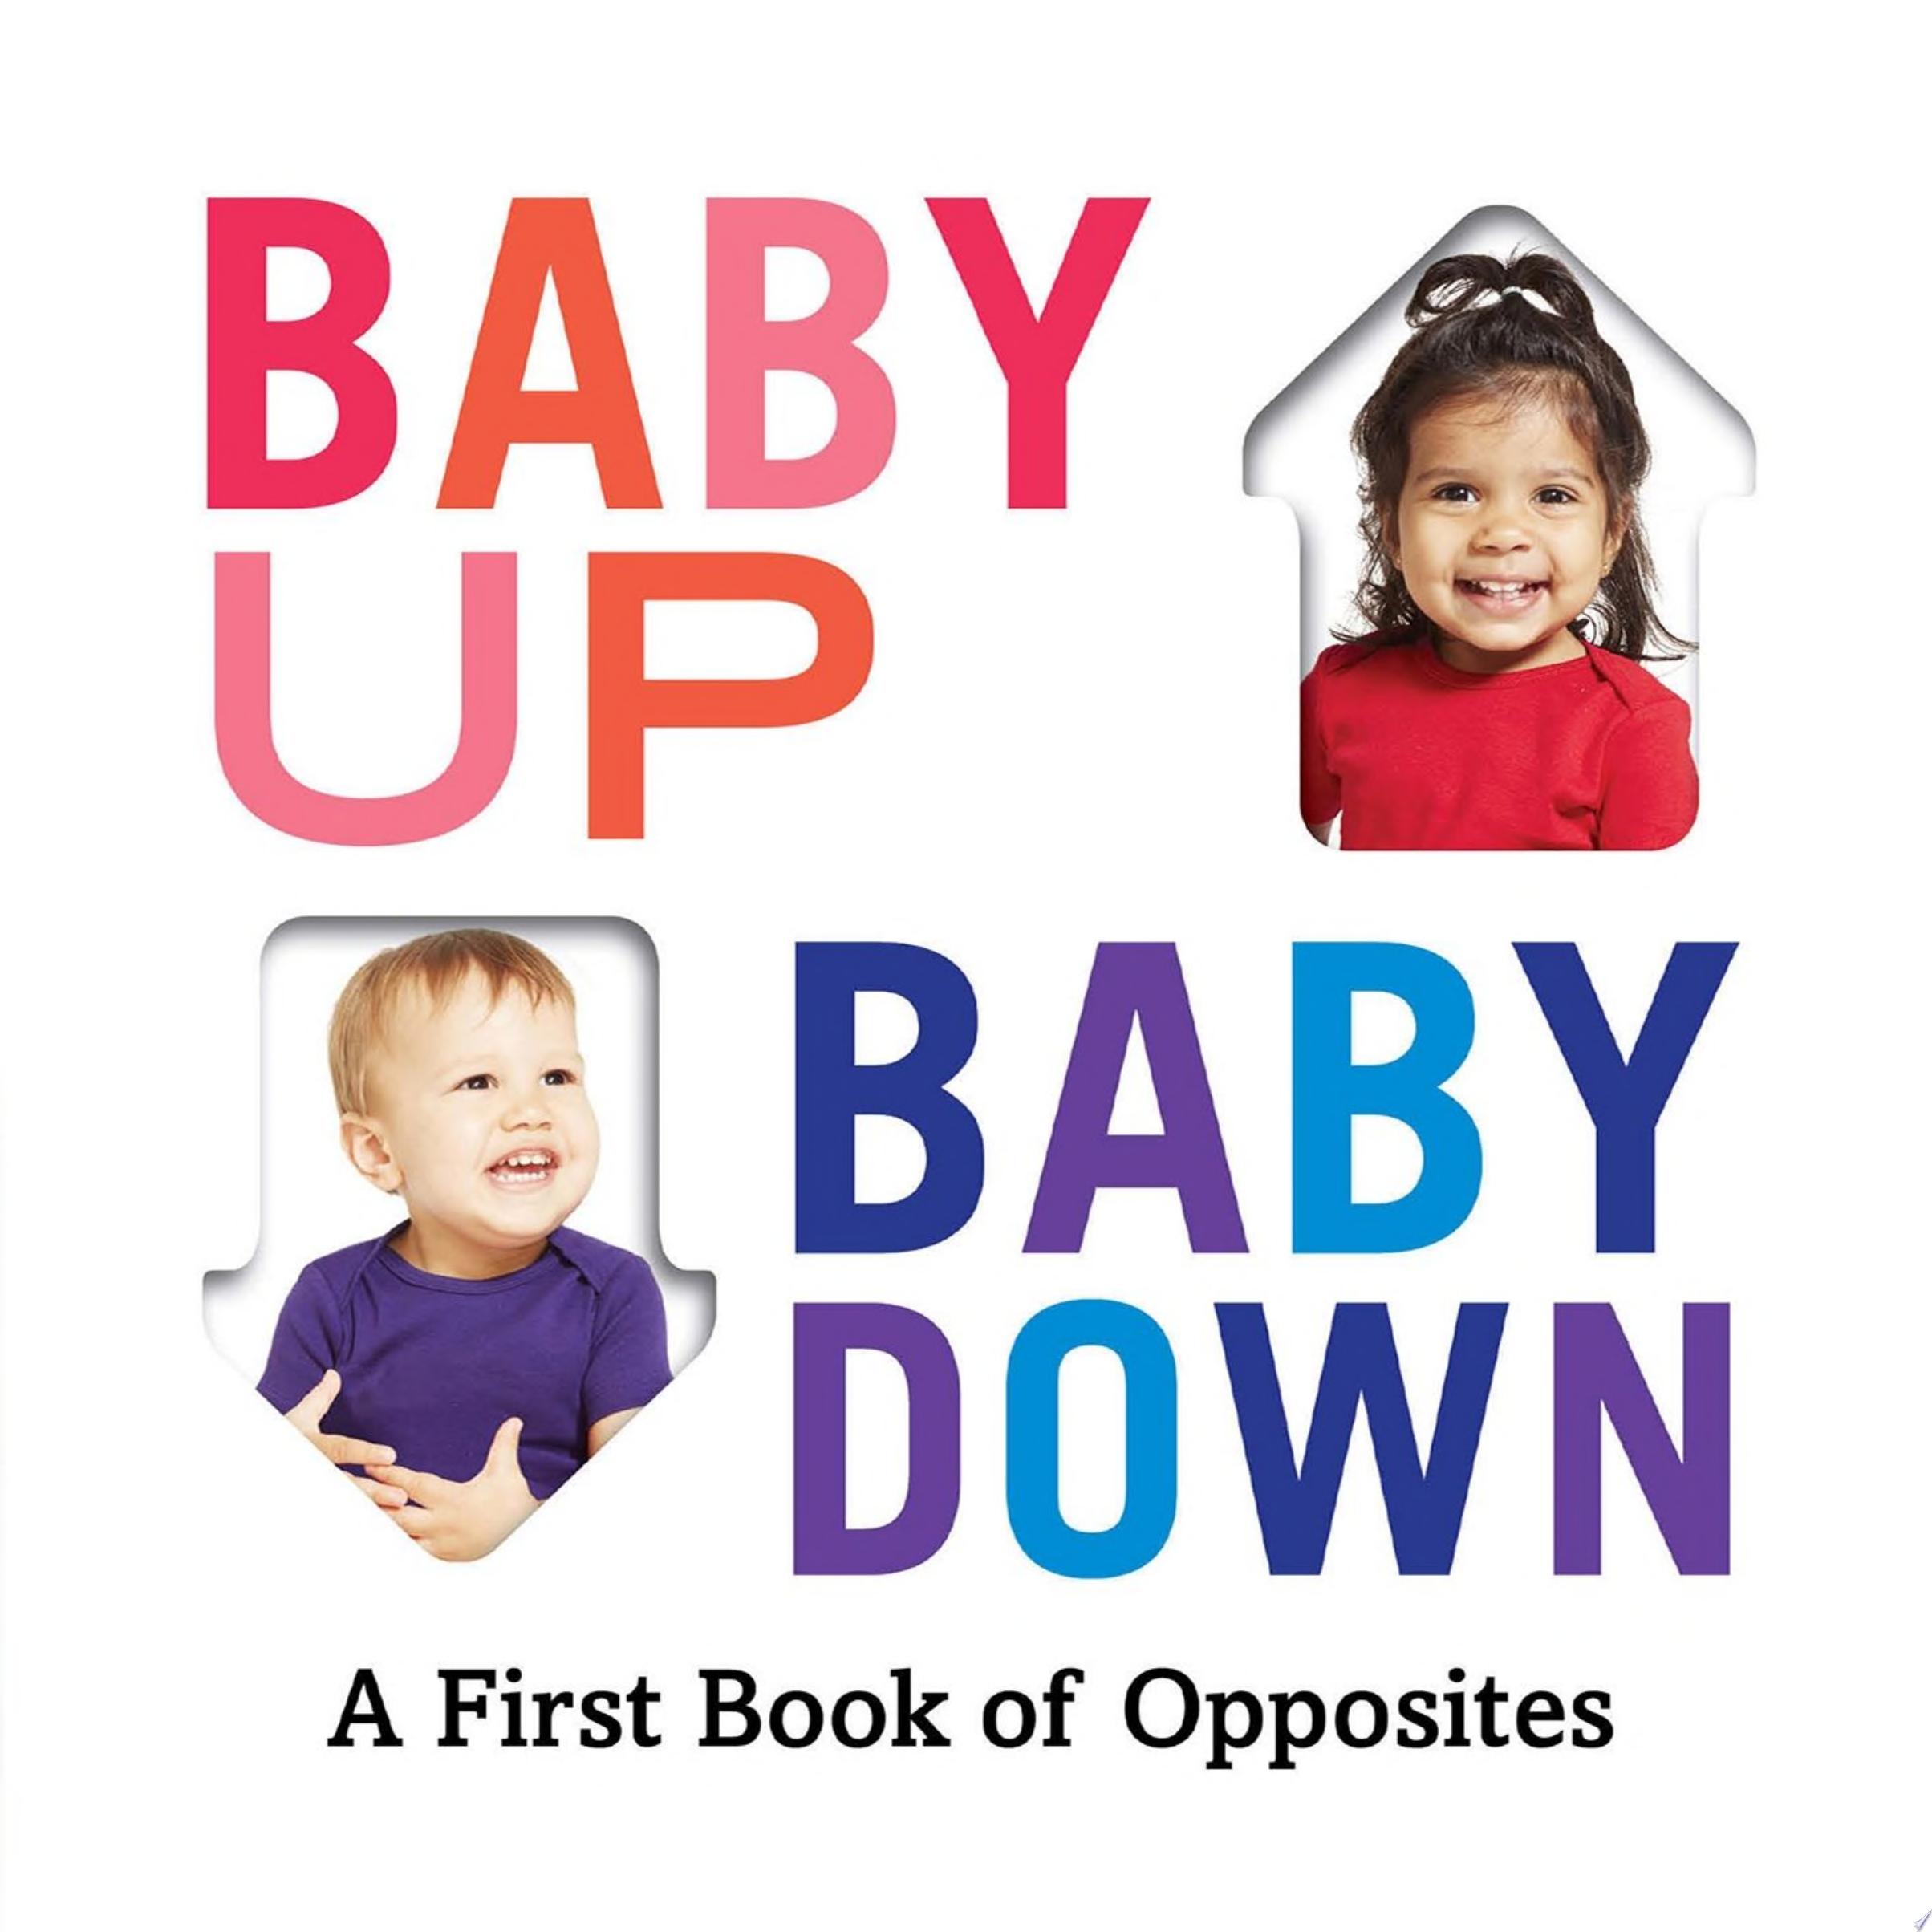 Image for "Baby Up, Baby Down"